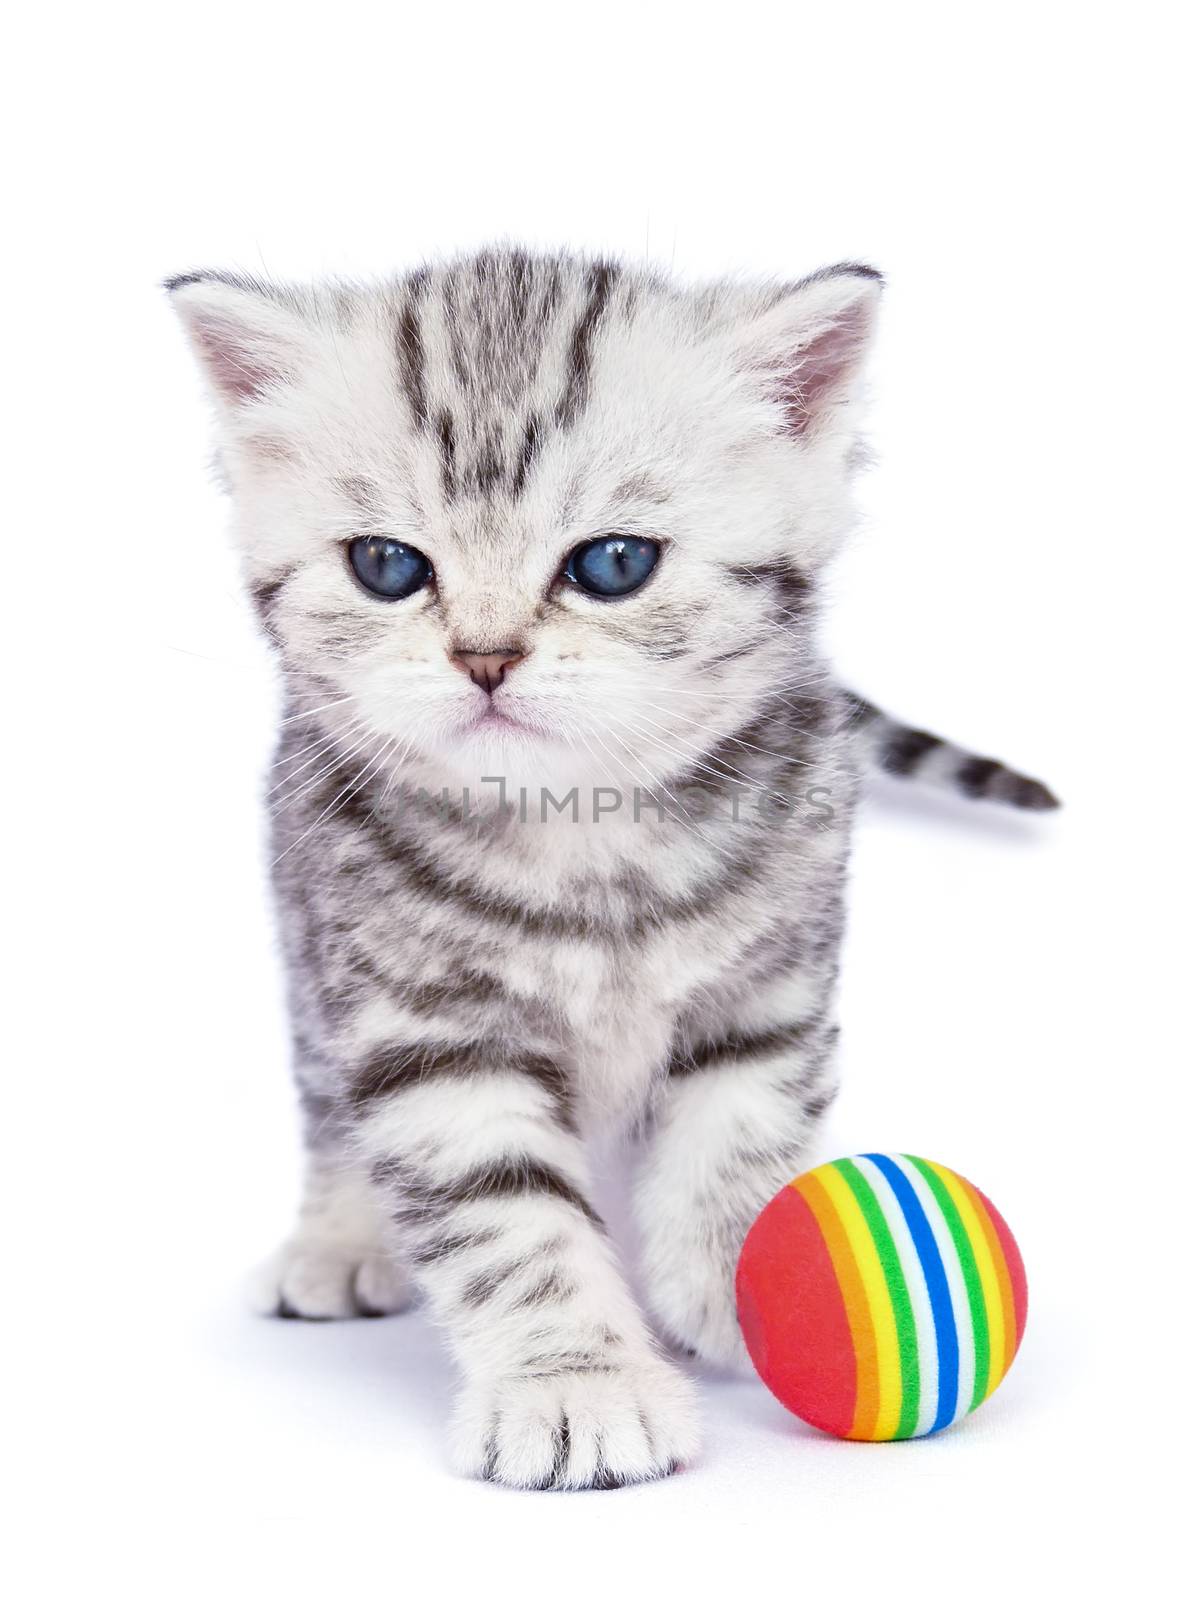 Young standing silver tabby cat with colorful ball by BenSchonewille